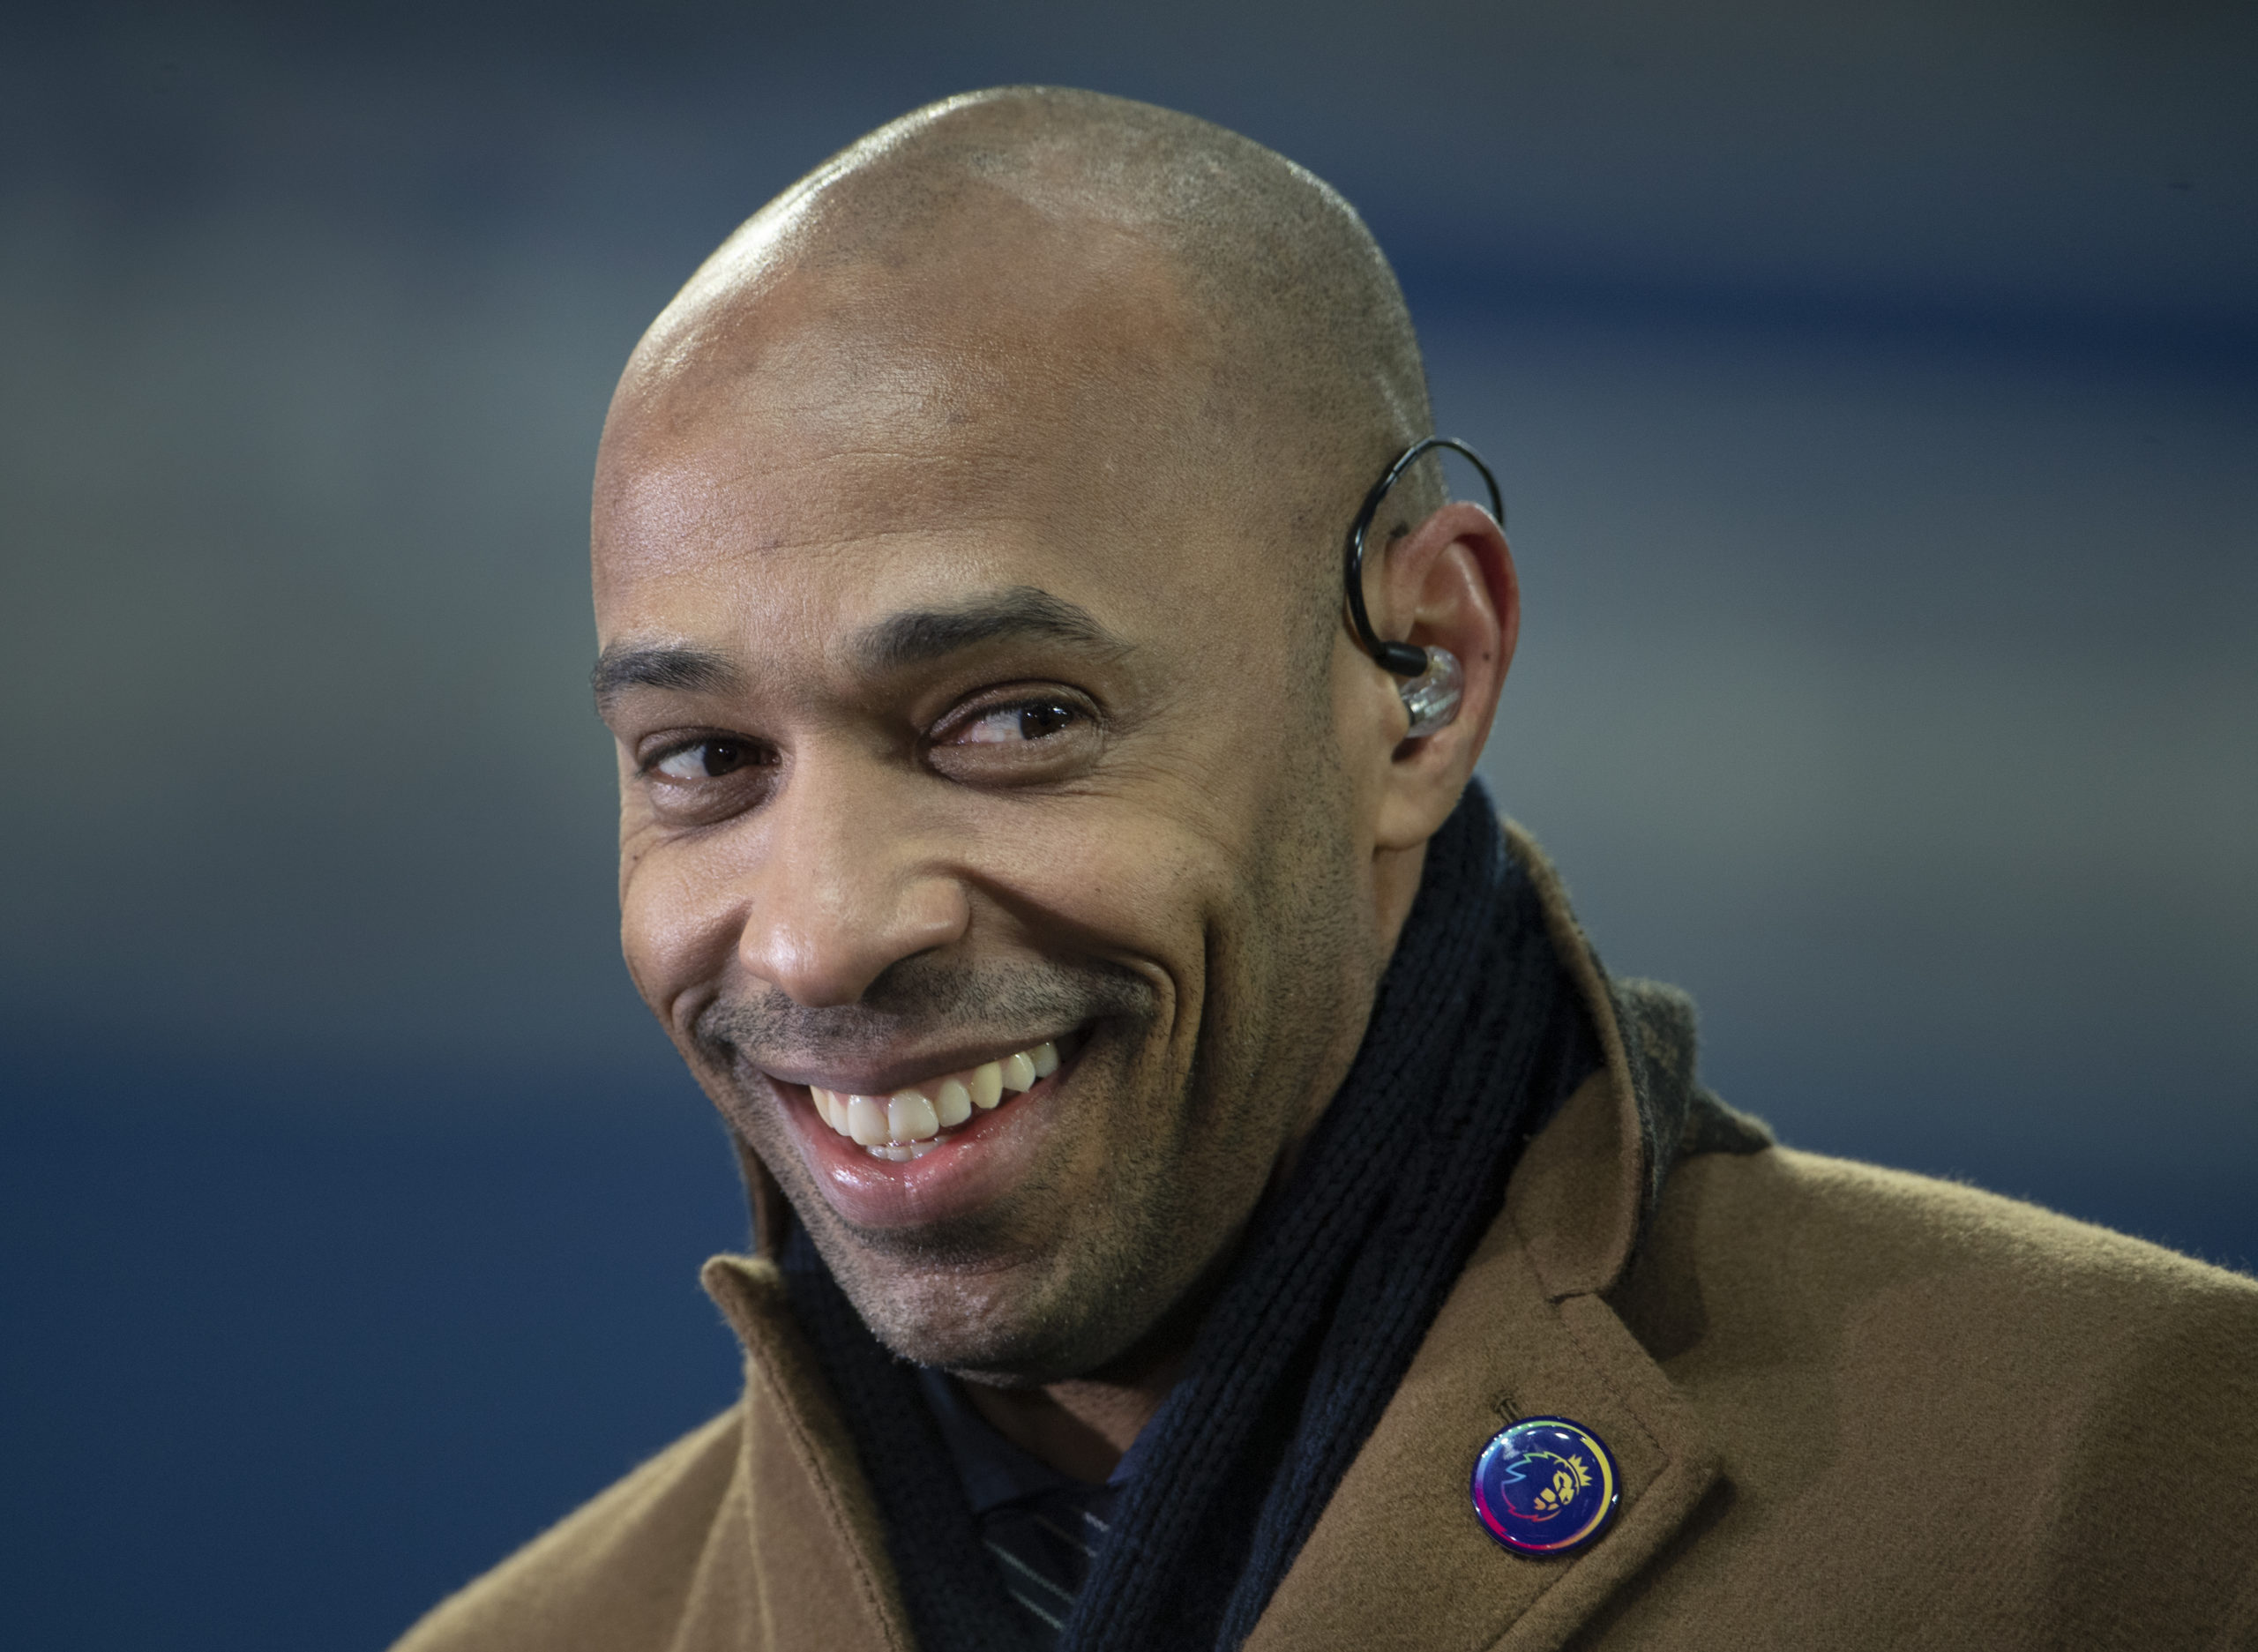 Thierry Henry shows West Ham rare common decency and respect